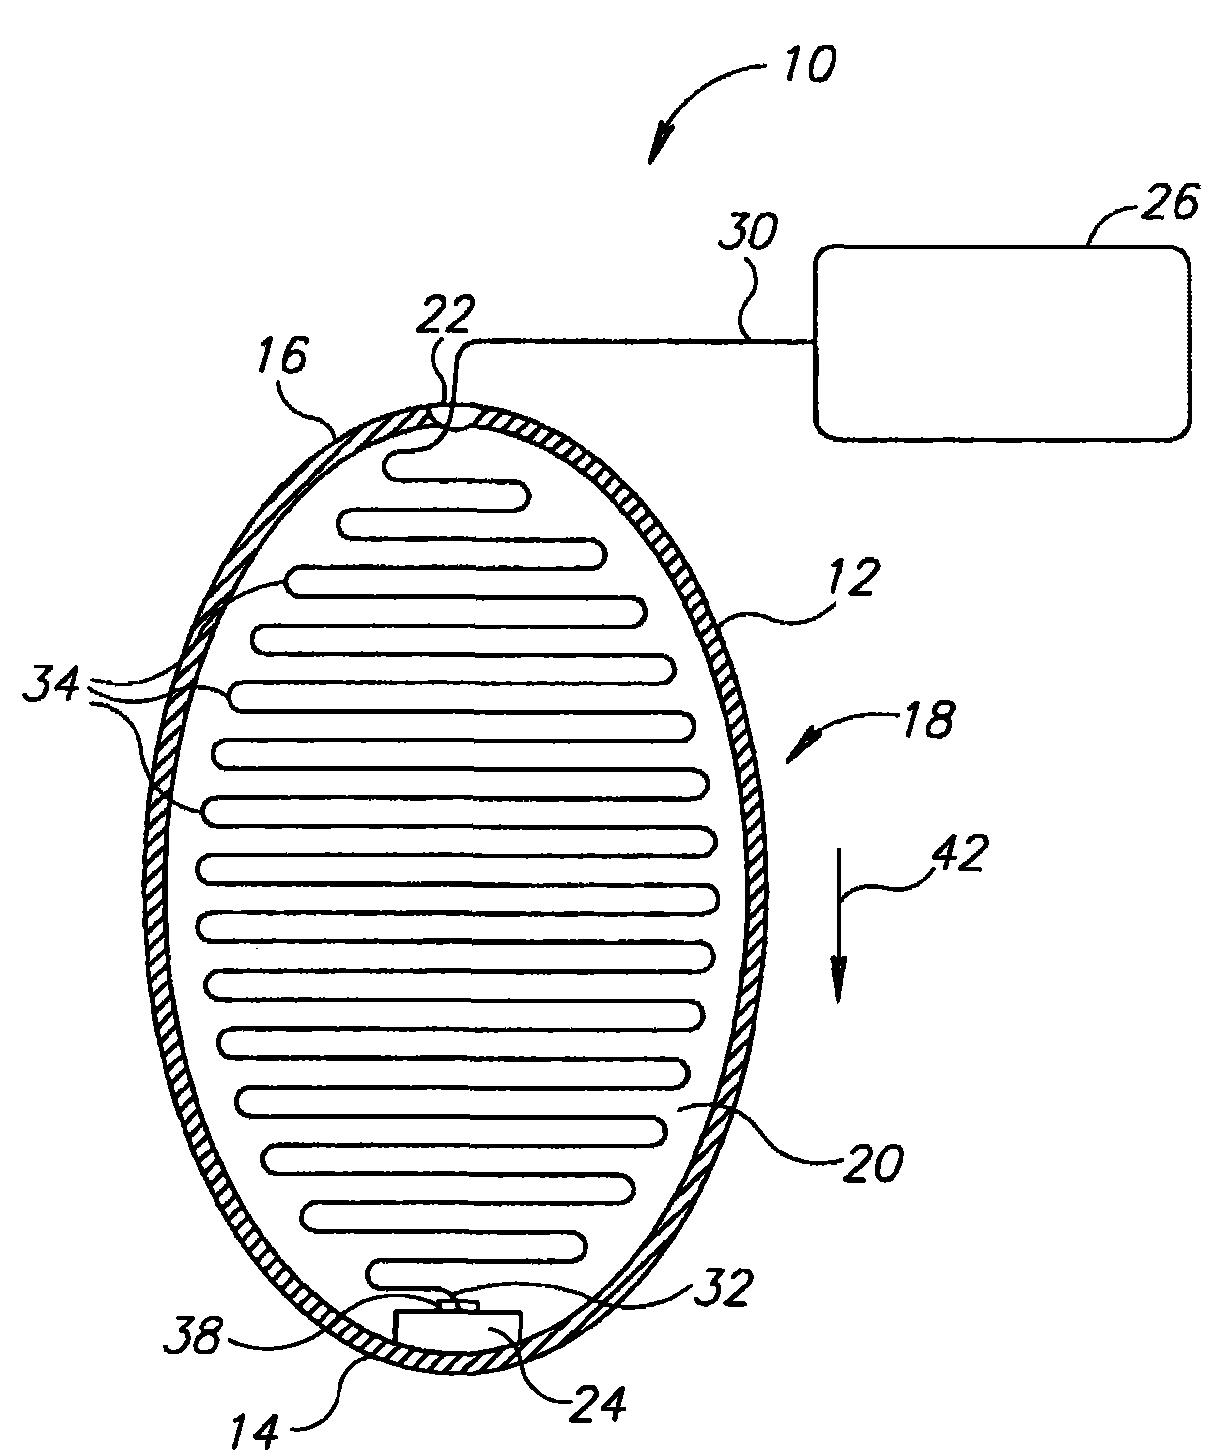 System and method for guiding of gastrointestinal device through the gastrointestinal tract